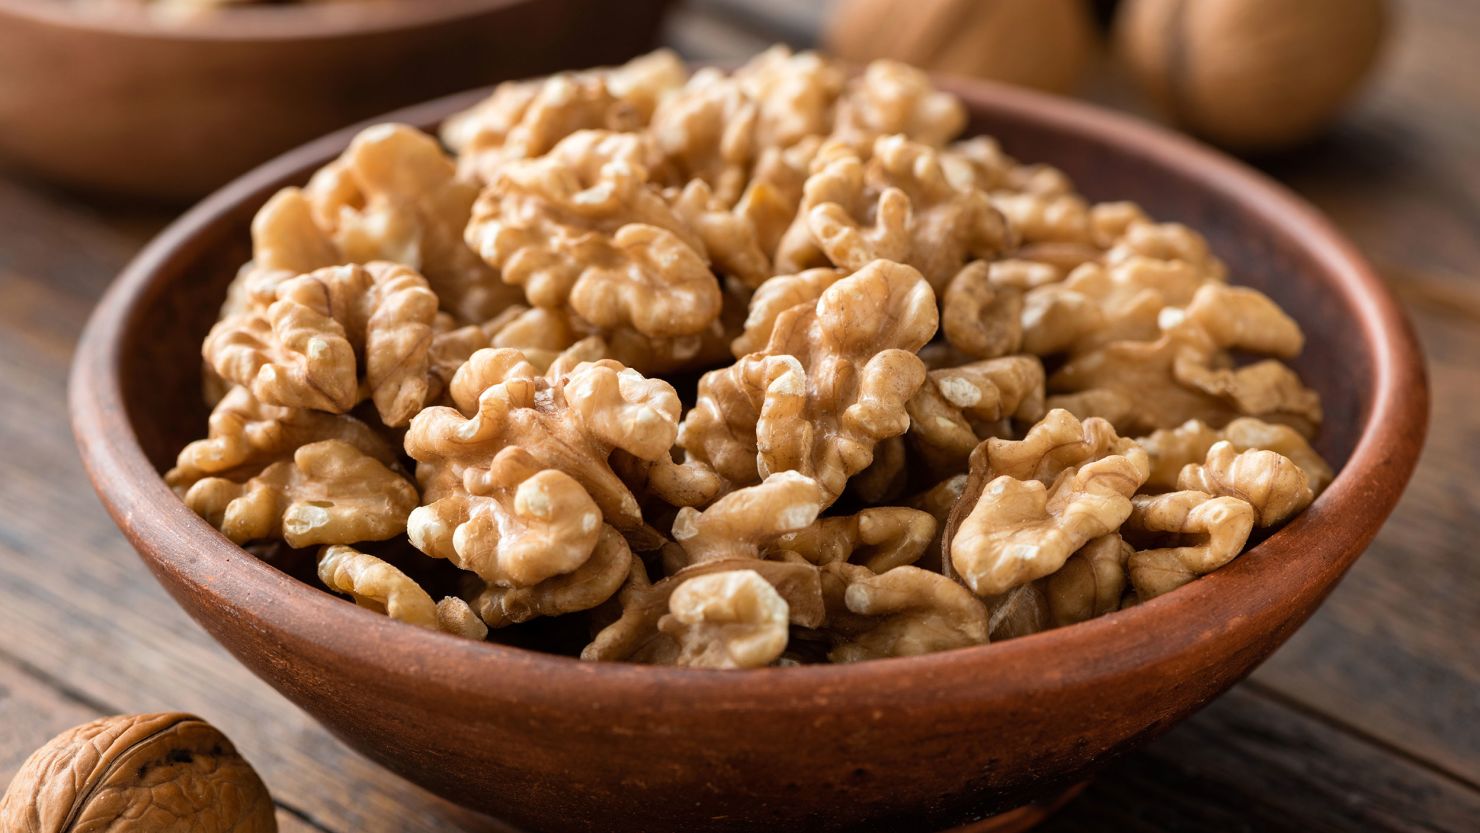 Breaking News Nationwide Walnut Recall Due to E. Coli Risk - What You Need to Know-